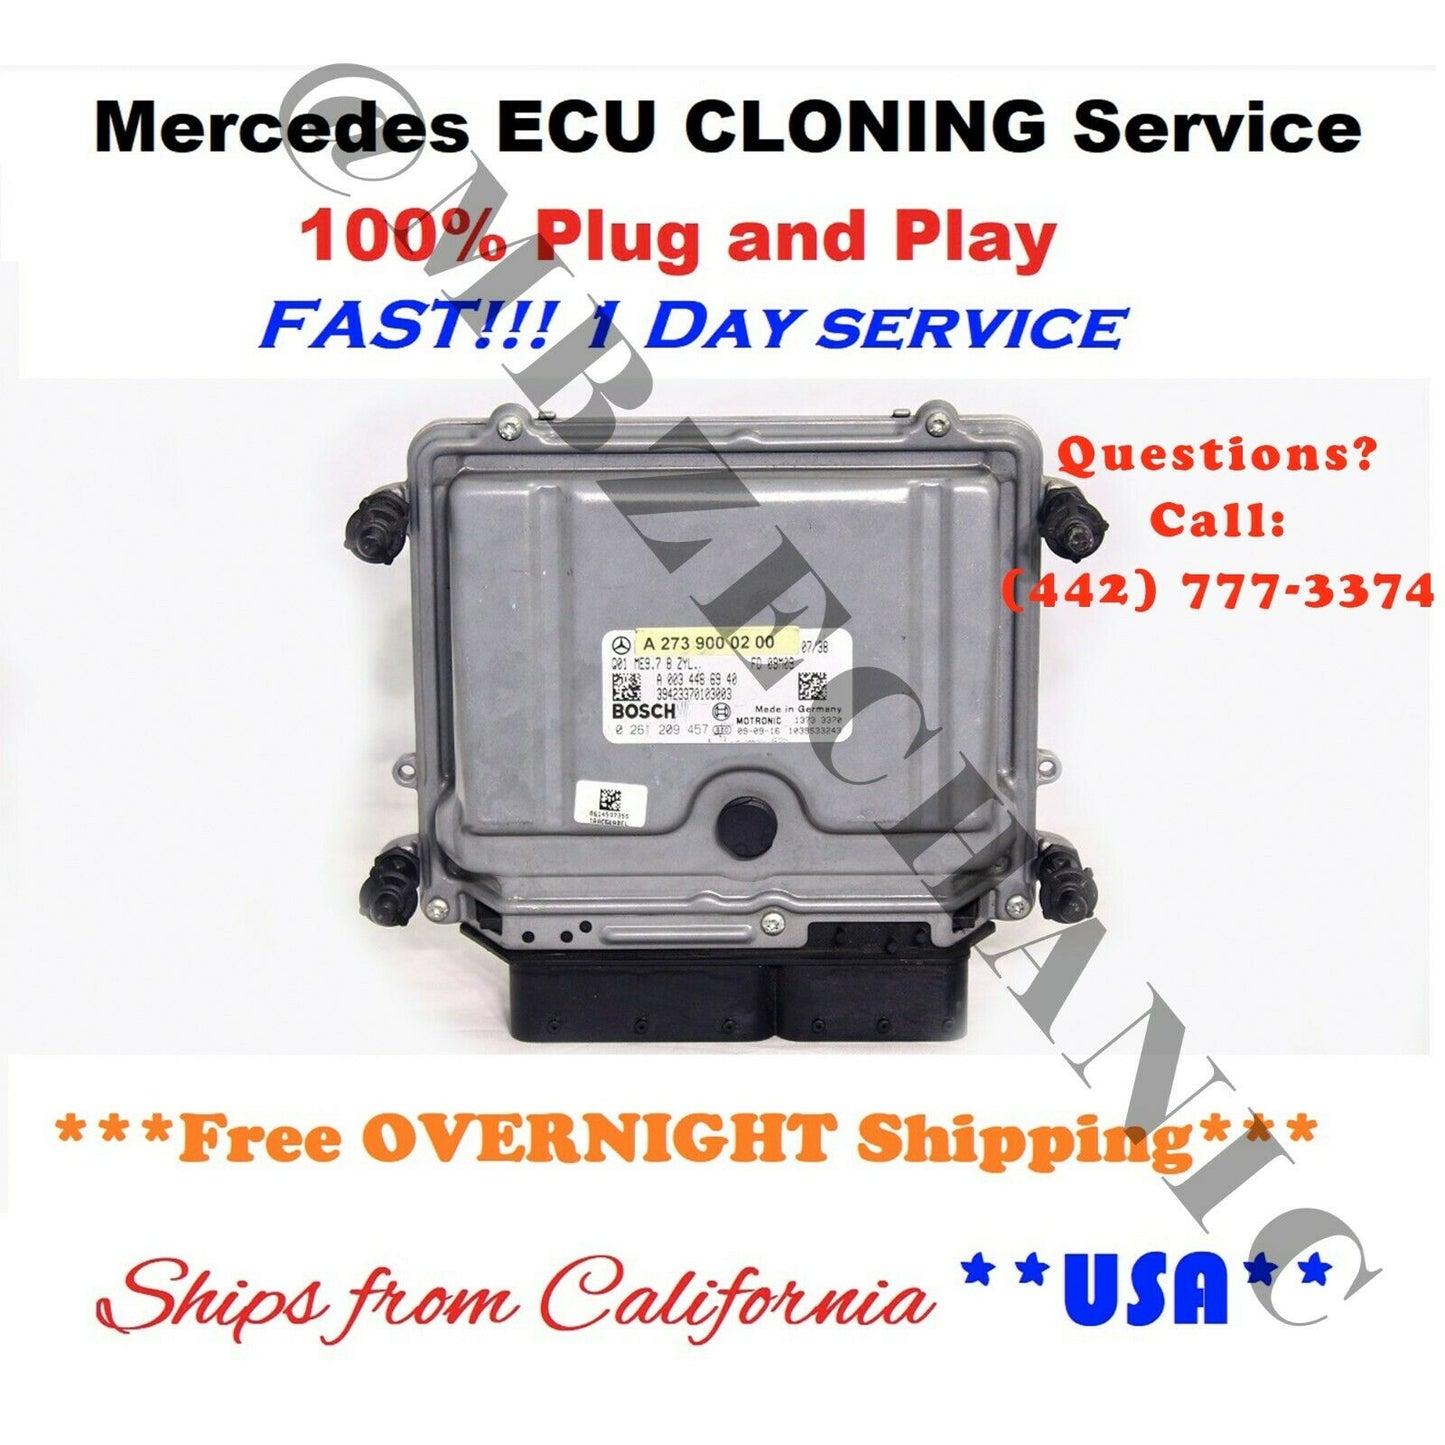 Mercedes CL 216 ECU Engine Computer CLONING SERVICE Plug and Play